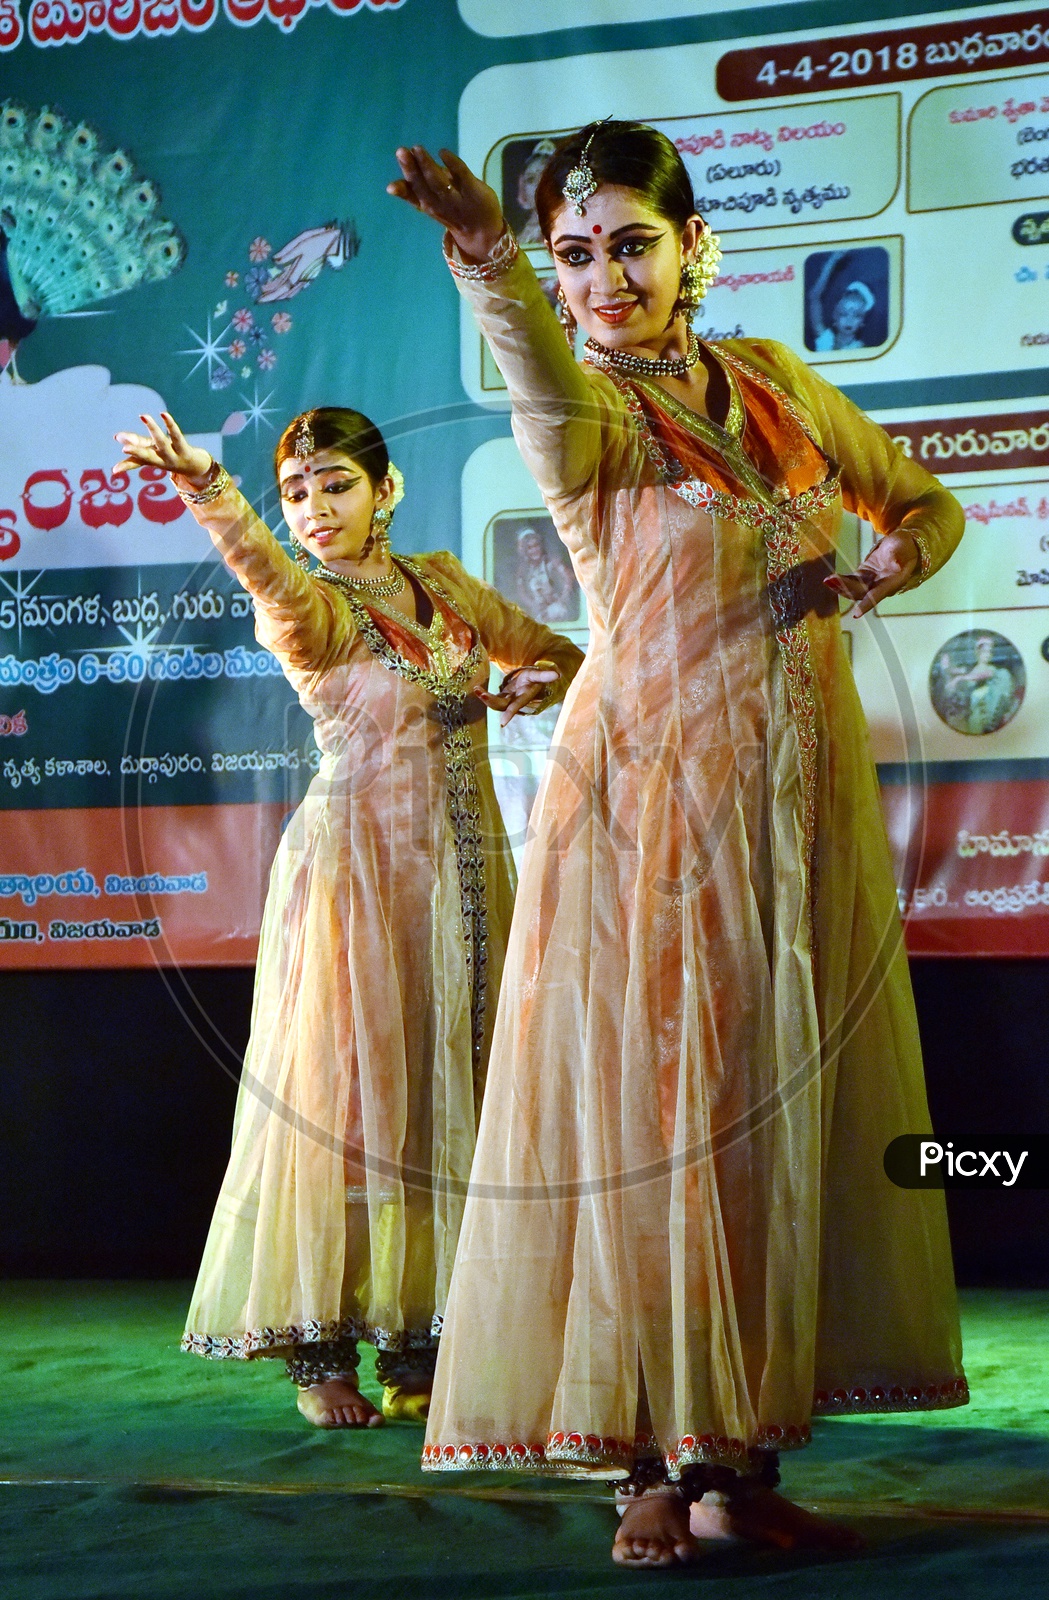 Artists performing Indian Classical Dance Kathak on stage